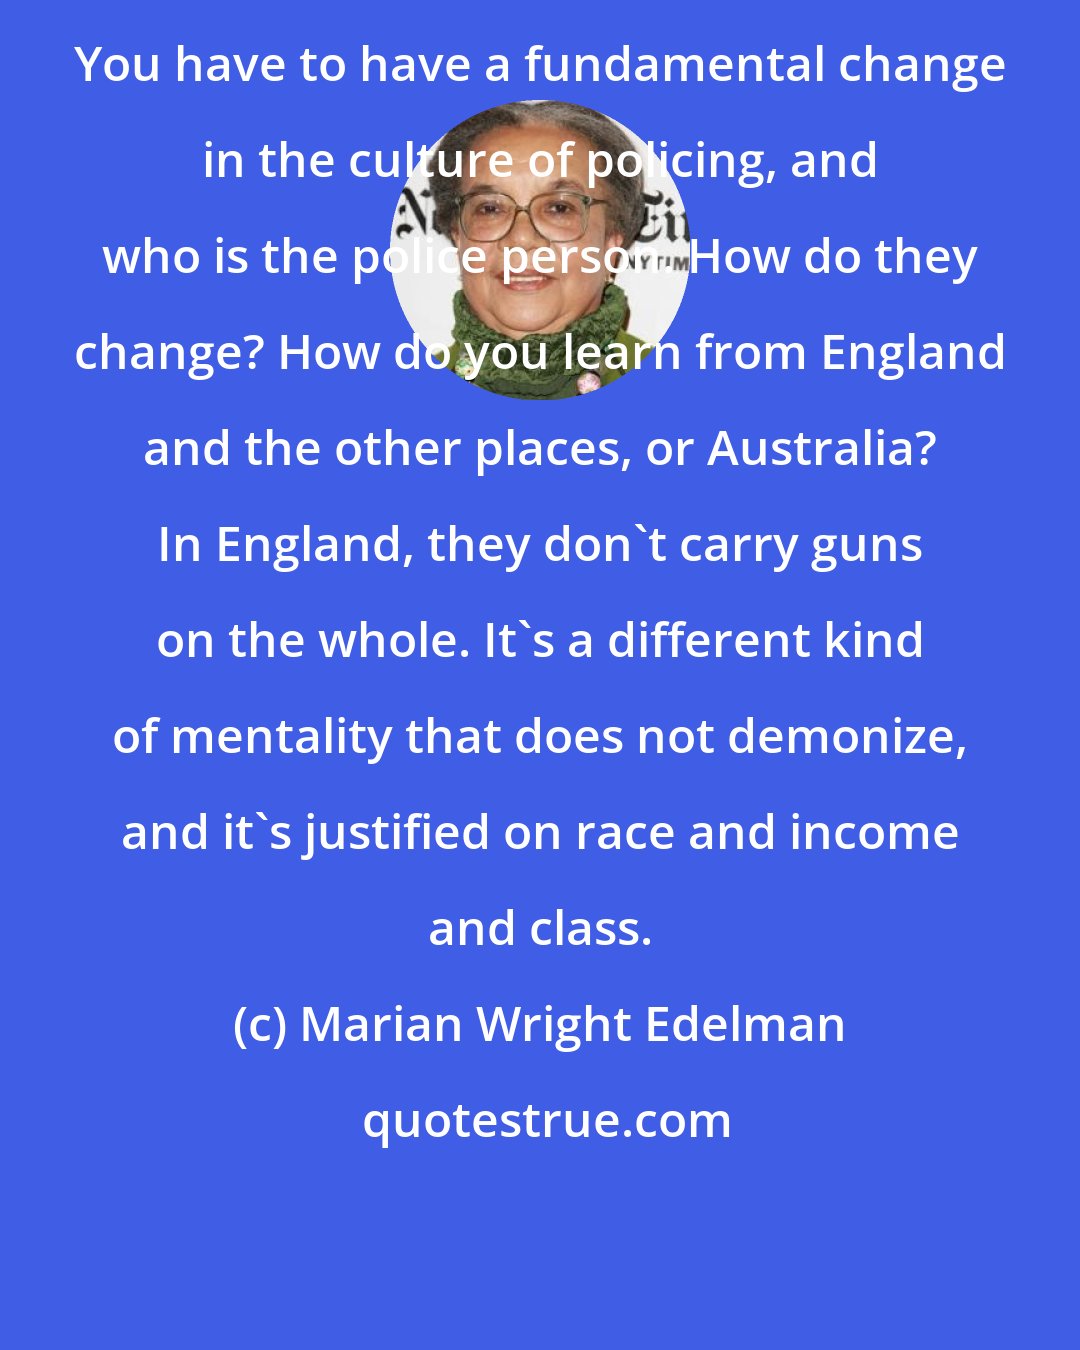 Marian Wright Edelman: You have to have a fundamental change in the culture of policing, and who is the police person. How do they change? How do you learn from England and the other places, or Australia? In England, they don't carry guns on the whole. It's a different kind of mentality that does not demonize, and it's justified on race and income and class.